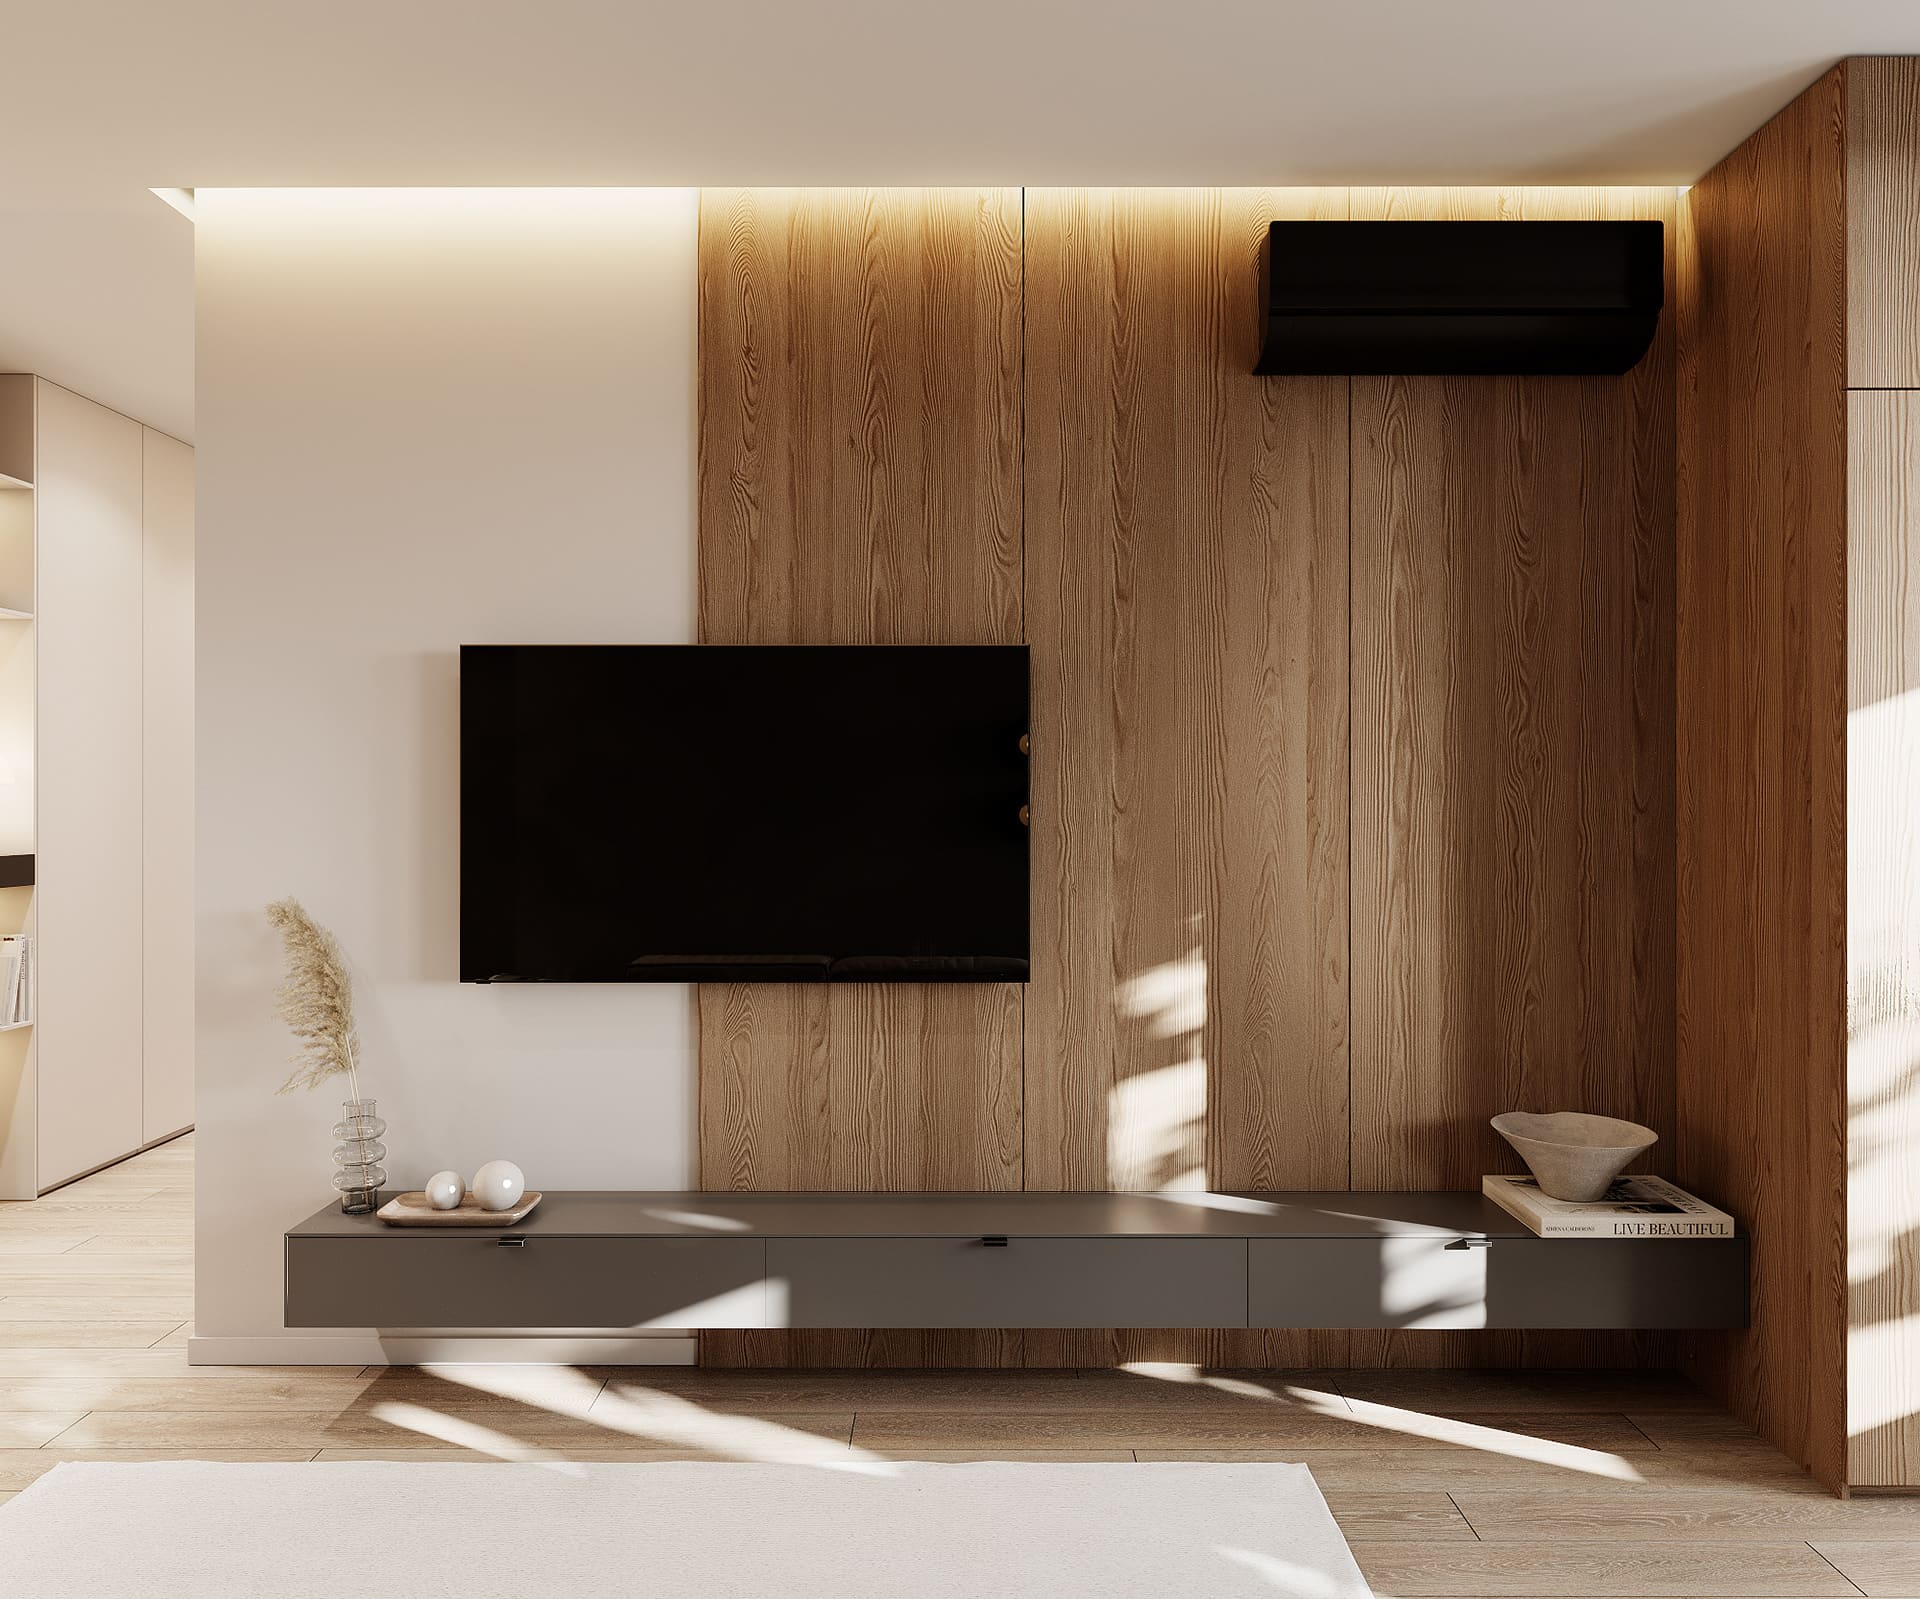 Laconic apartment in the style of minimalism, kitchen-living room, photo 10